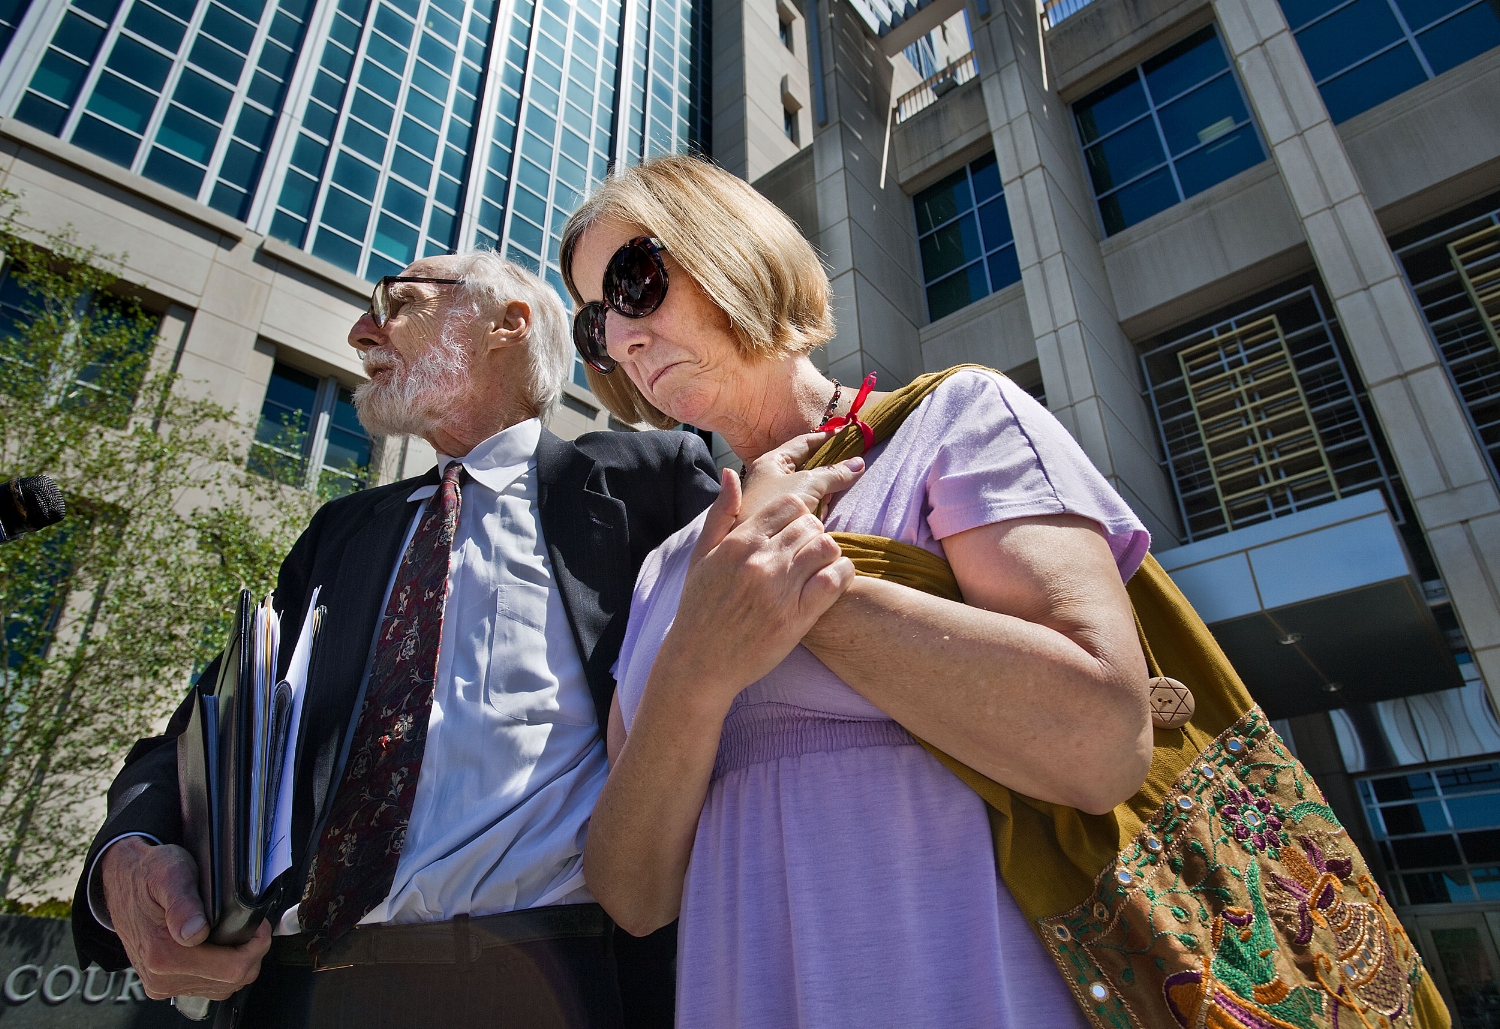  Anti-war activist Cindy Sheehan, right, with her attorney Dennis Cunningham outside the Federal Courthouse in Sacramento on Thursday, April 19, 2012. 